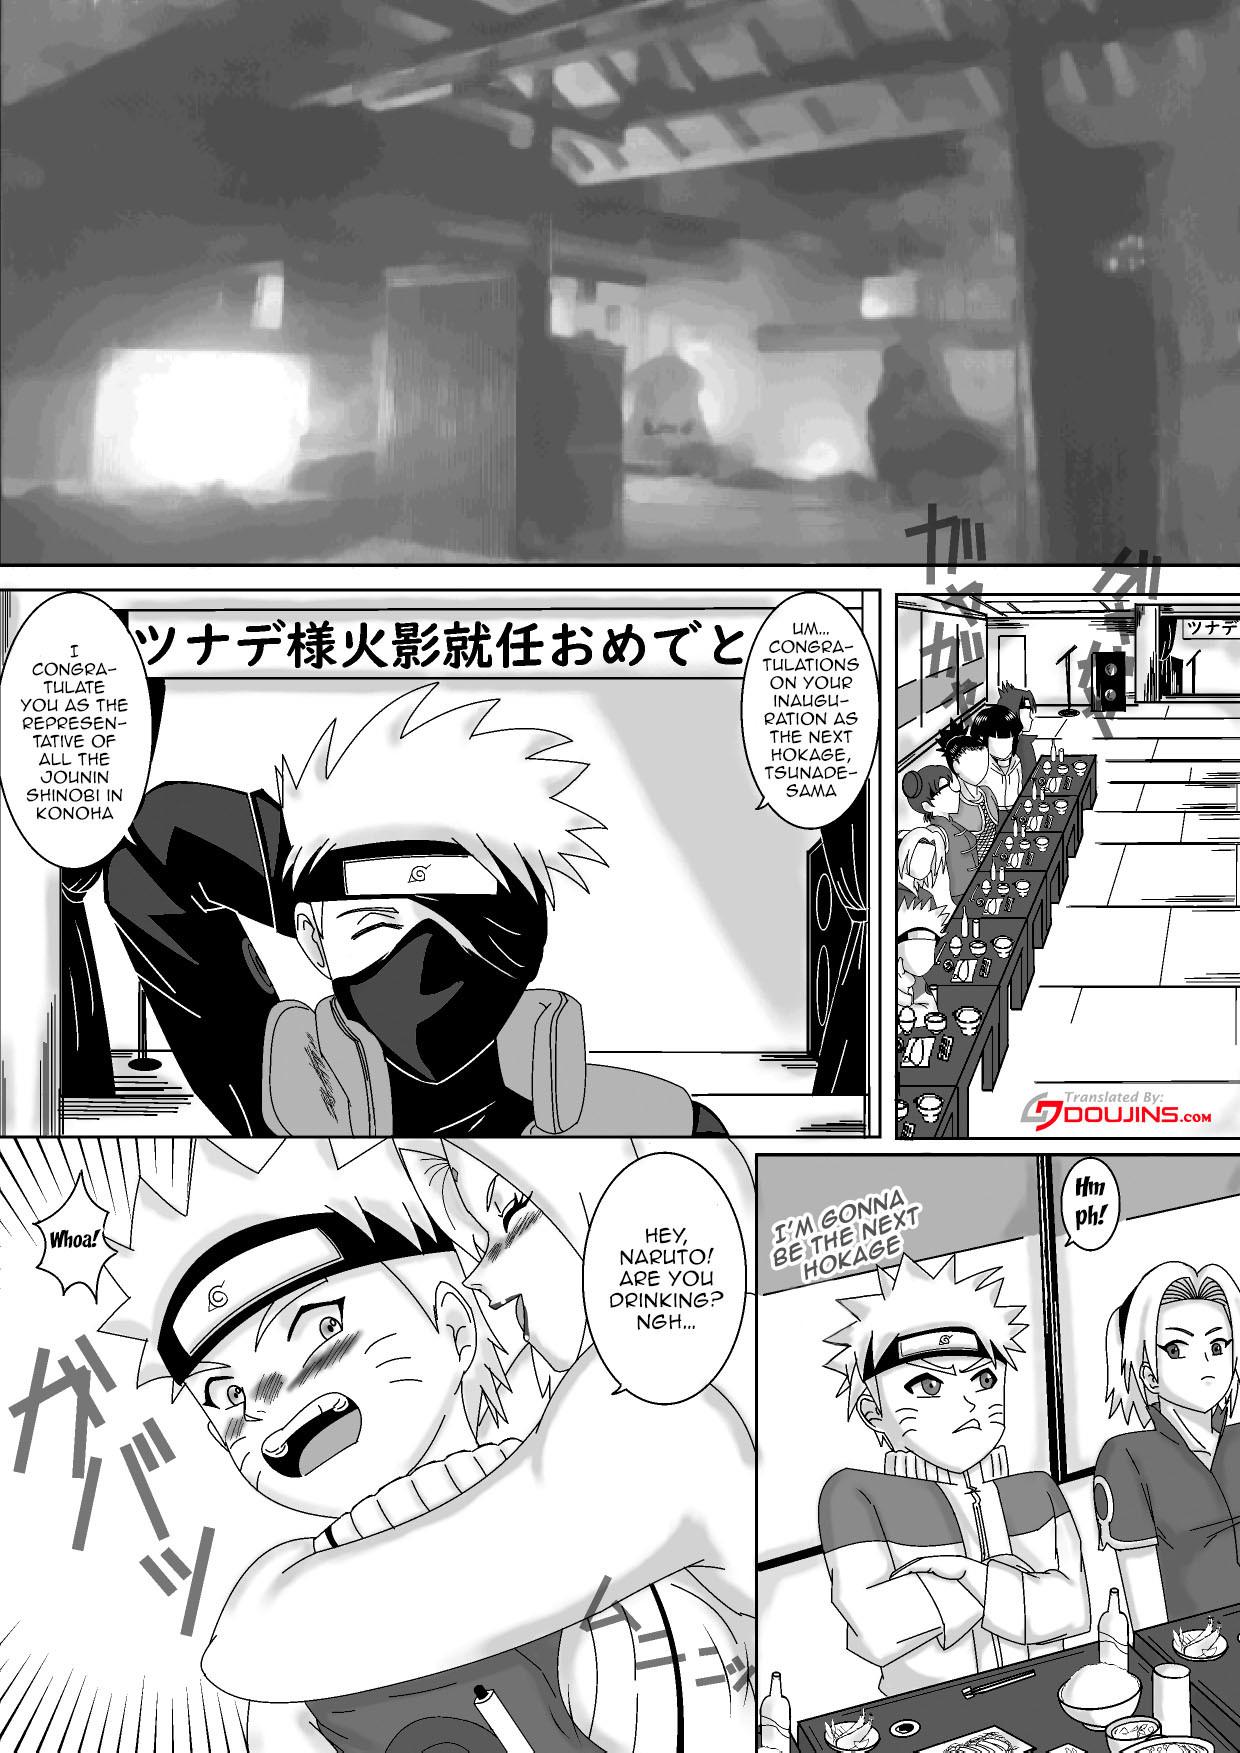 Cock Suckers Nomisugite Deisui Shita BBA to Yarimakutta Ken!! | The Case Of Having Sex With This Old Lady After She Got Herself Really Drunk - Naruto Thylinh - Page 2